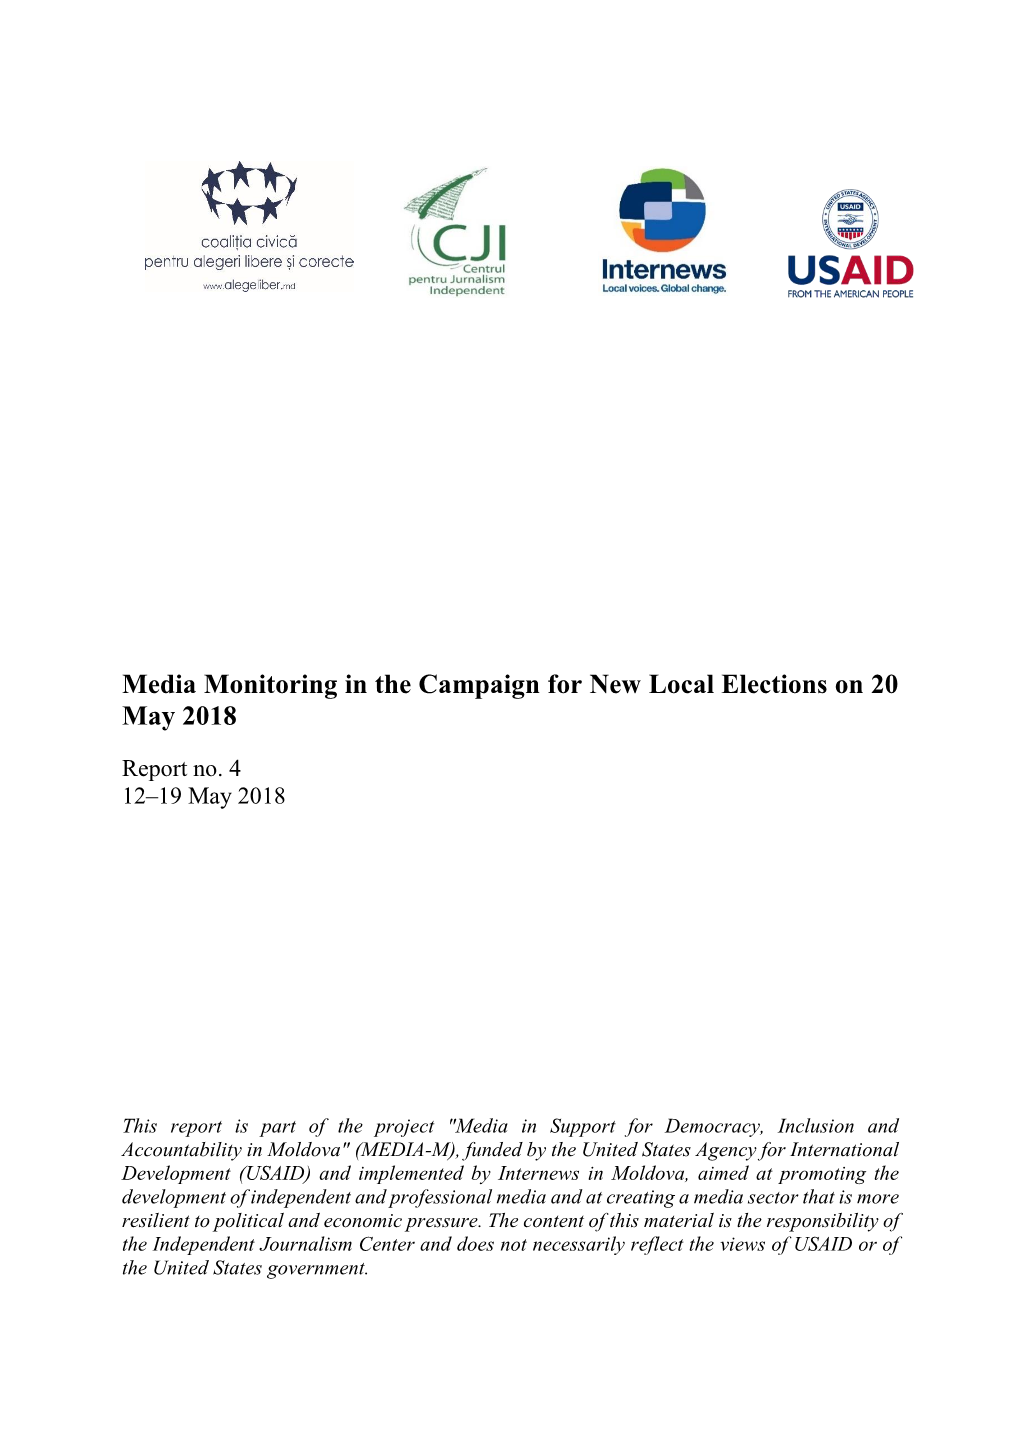 Media Monitoring in the Campaign for New Local Elections on 20 May 2018